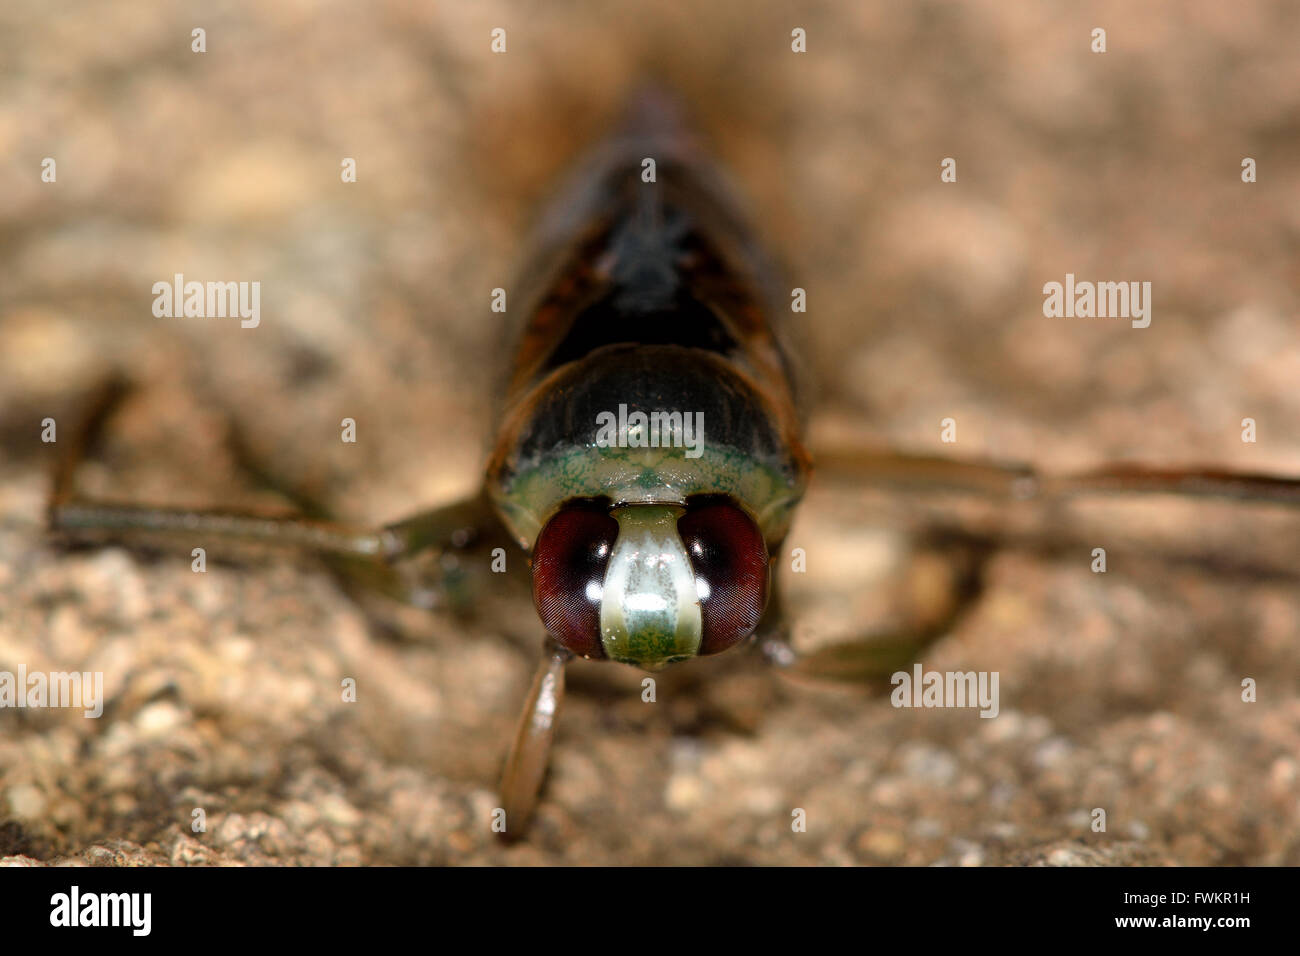 Notonecta maculata backswimmer head on. Predatory aquatic true bug in the family Notonectidae, also known as a water boatman Stock Photo